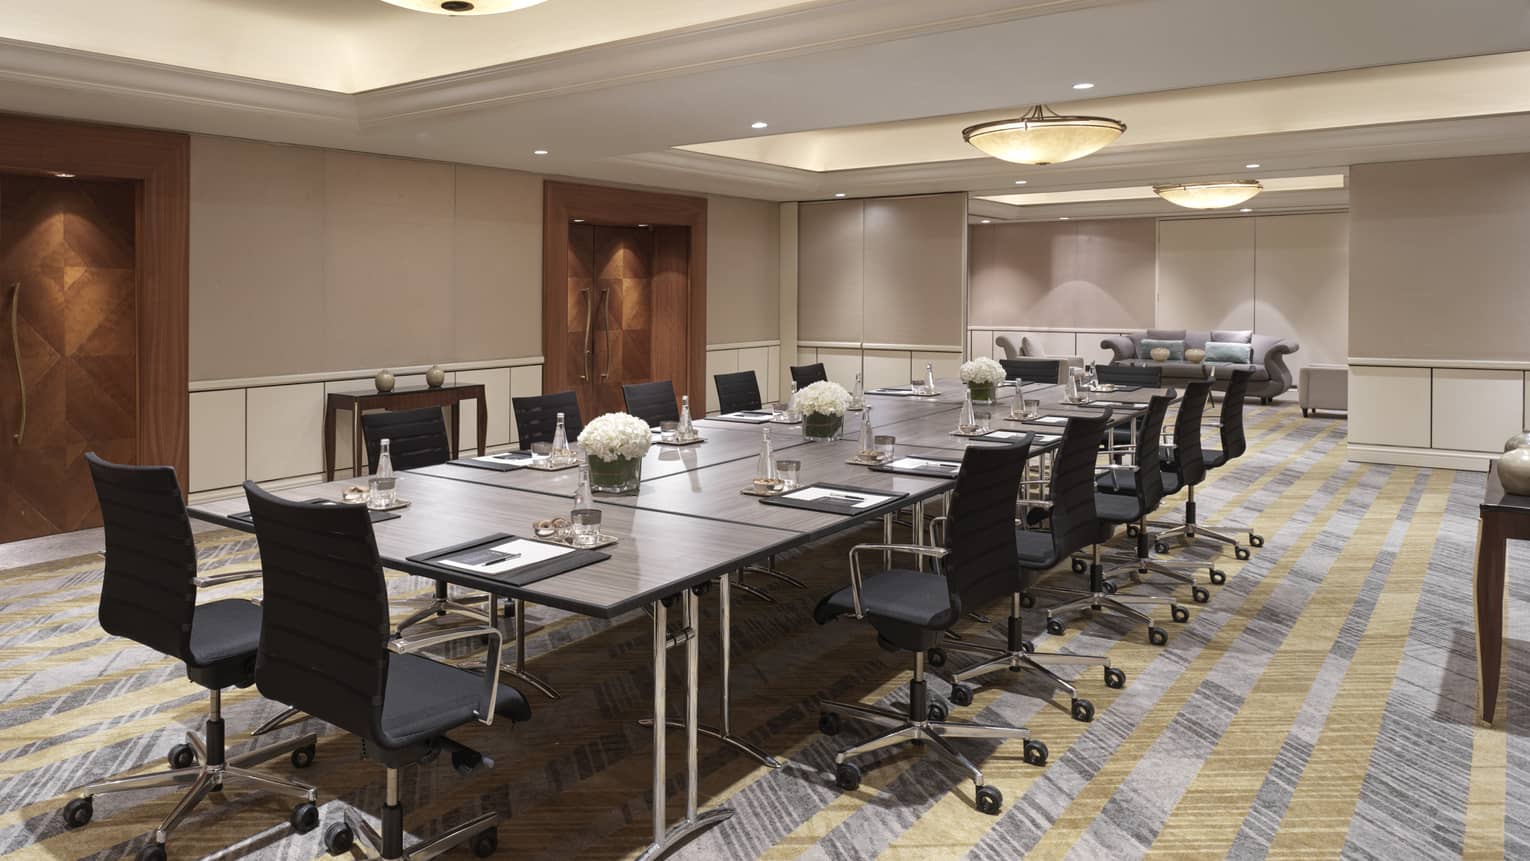 A boardroom with a long black table, and black office chairs.